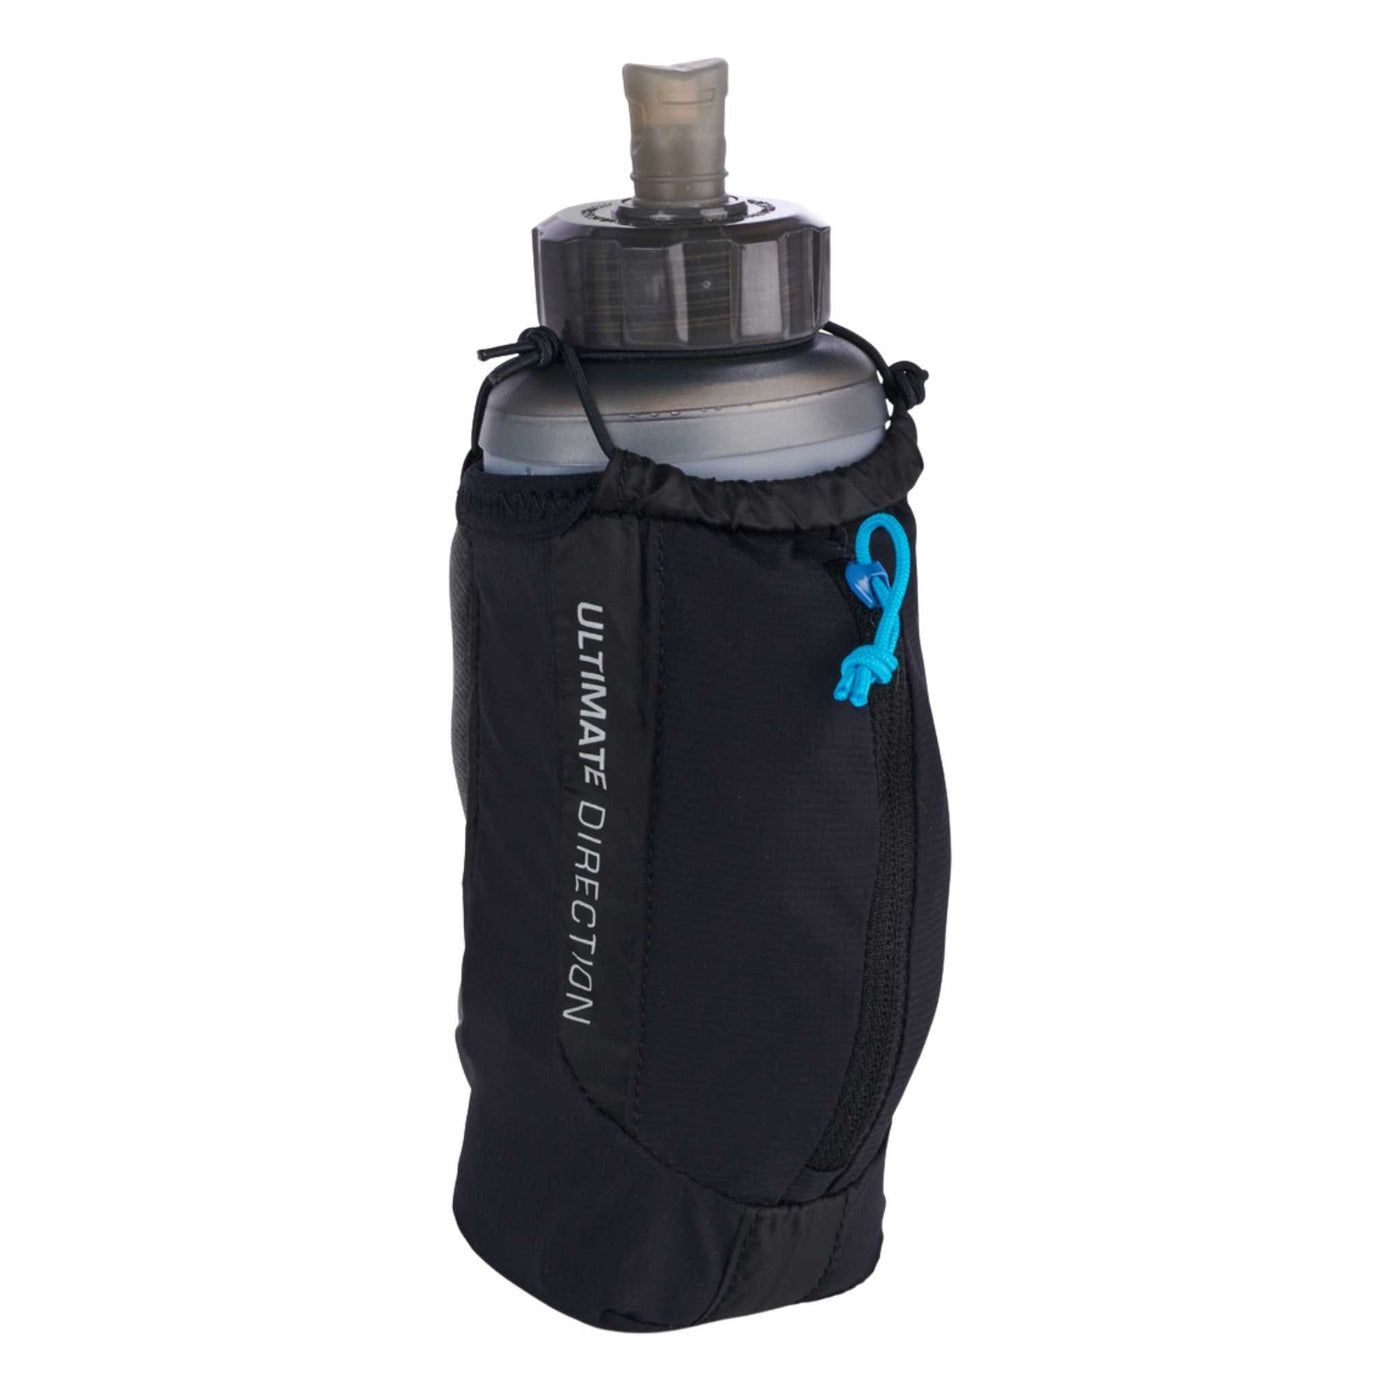 Ultimate Direction Clutch 6.0 | Hydration Packs and Vests NZ | Further Faster Christchurch NZ #onyx